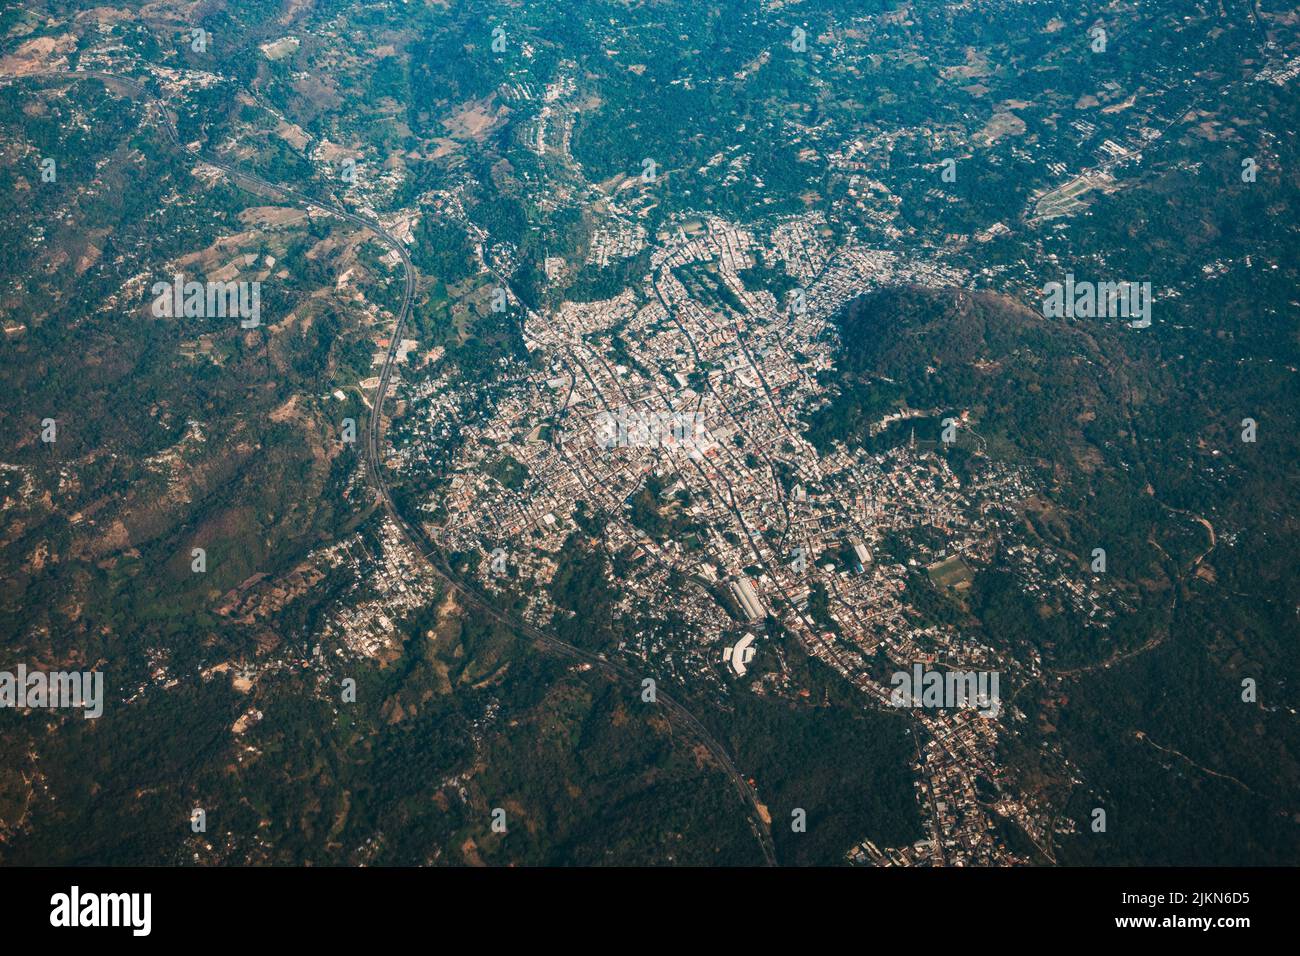 aerial view of the city of Cojutepeque, El Salvador Stock Photo